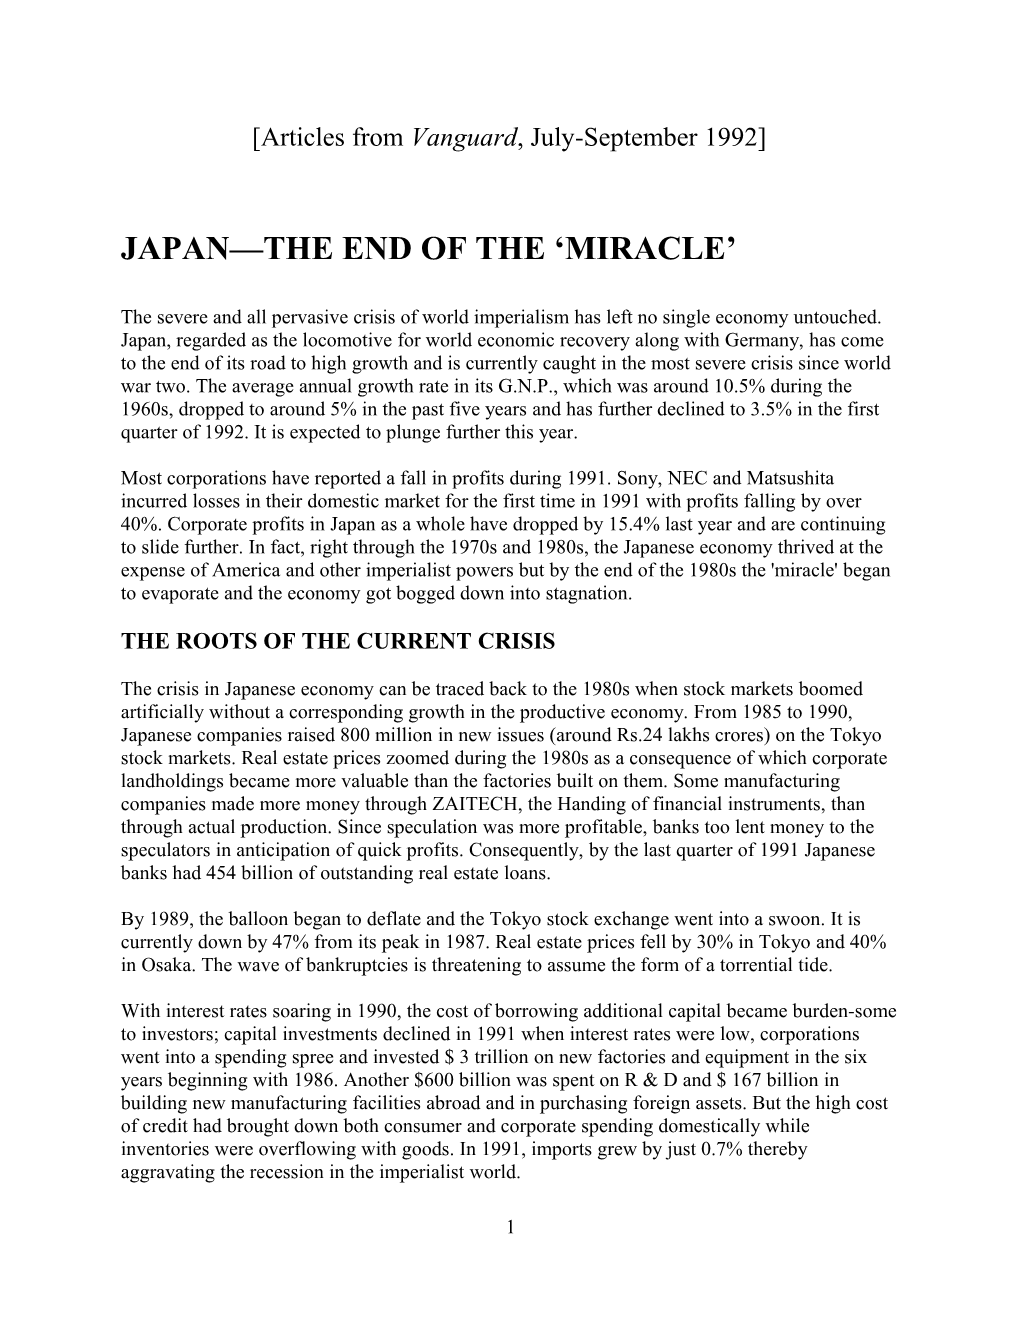 Japan-The End of the 'Miracle'